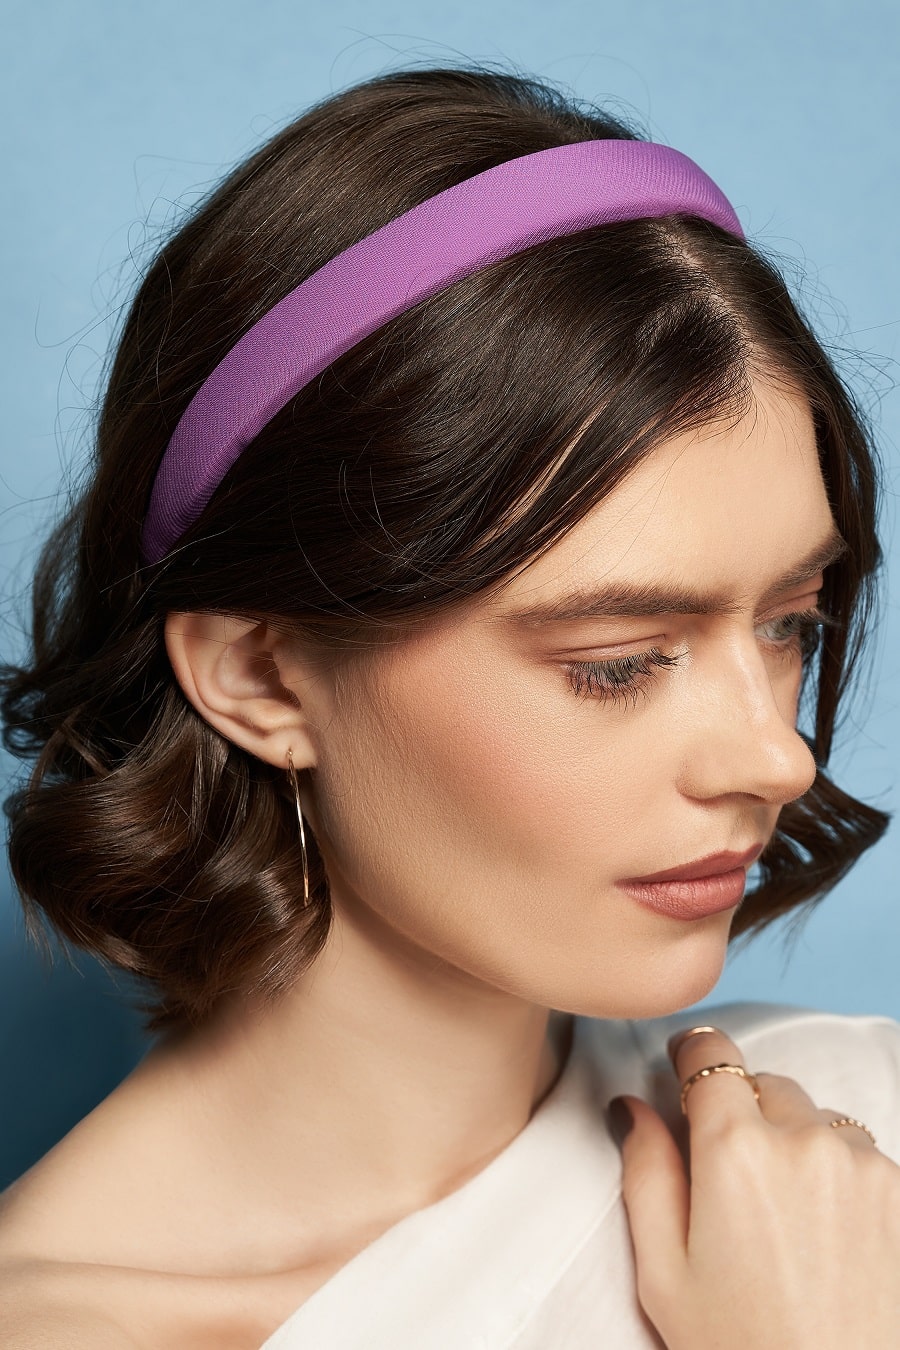 short hairstyle with headband for bridesmaids